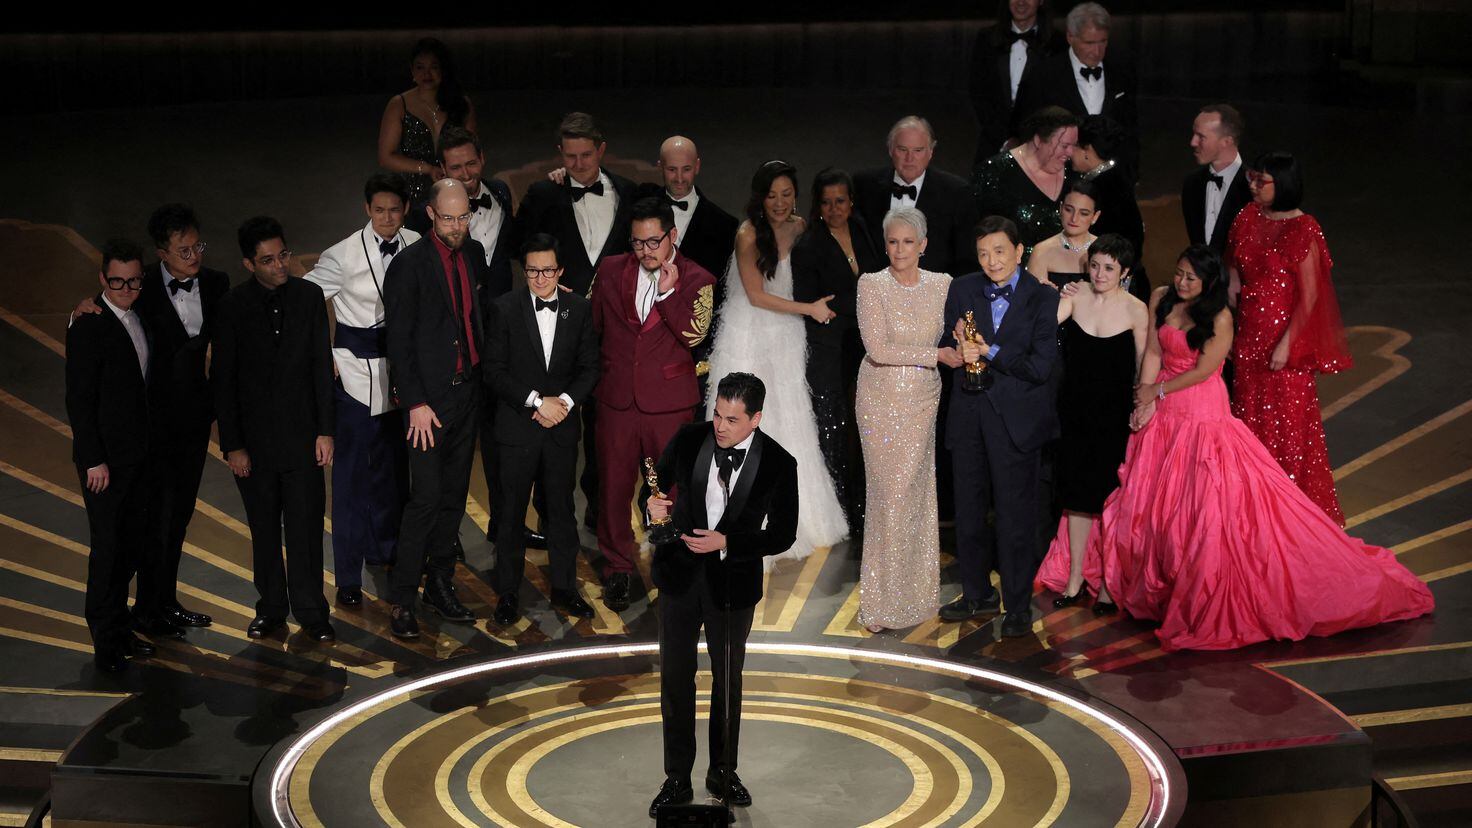 Who are the Oscar award winners at the 2023 ceremony? Final list by